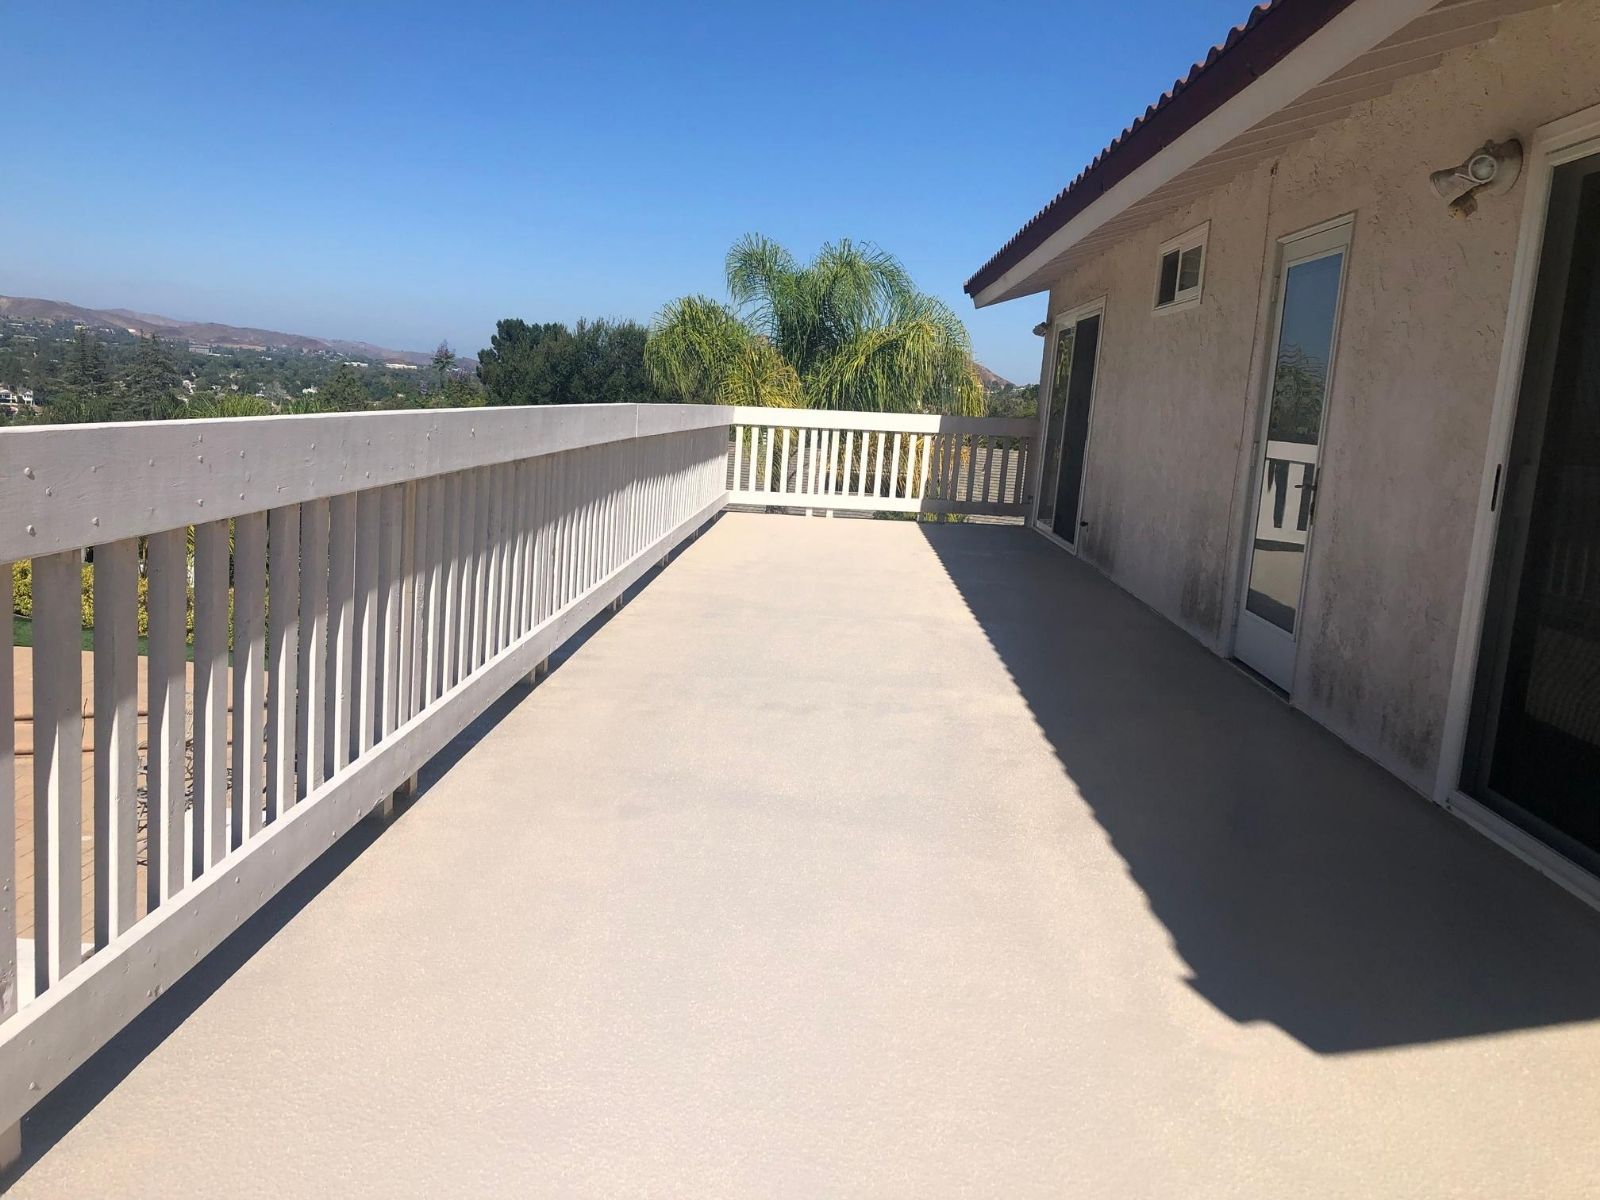 Deck Coating in Ventura County - All Climate Roofing